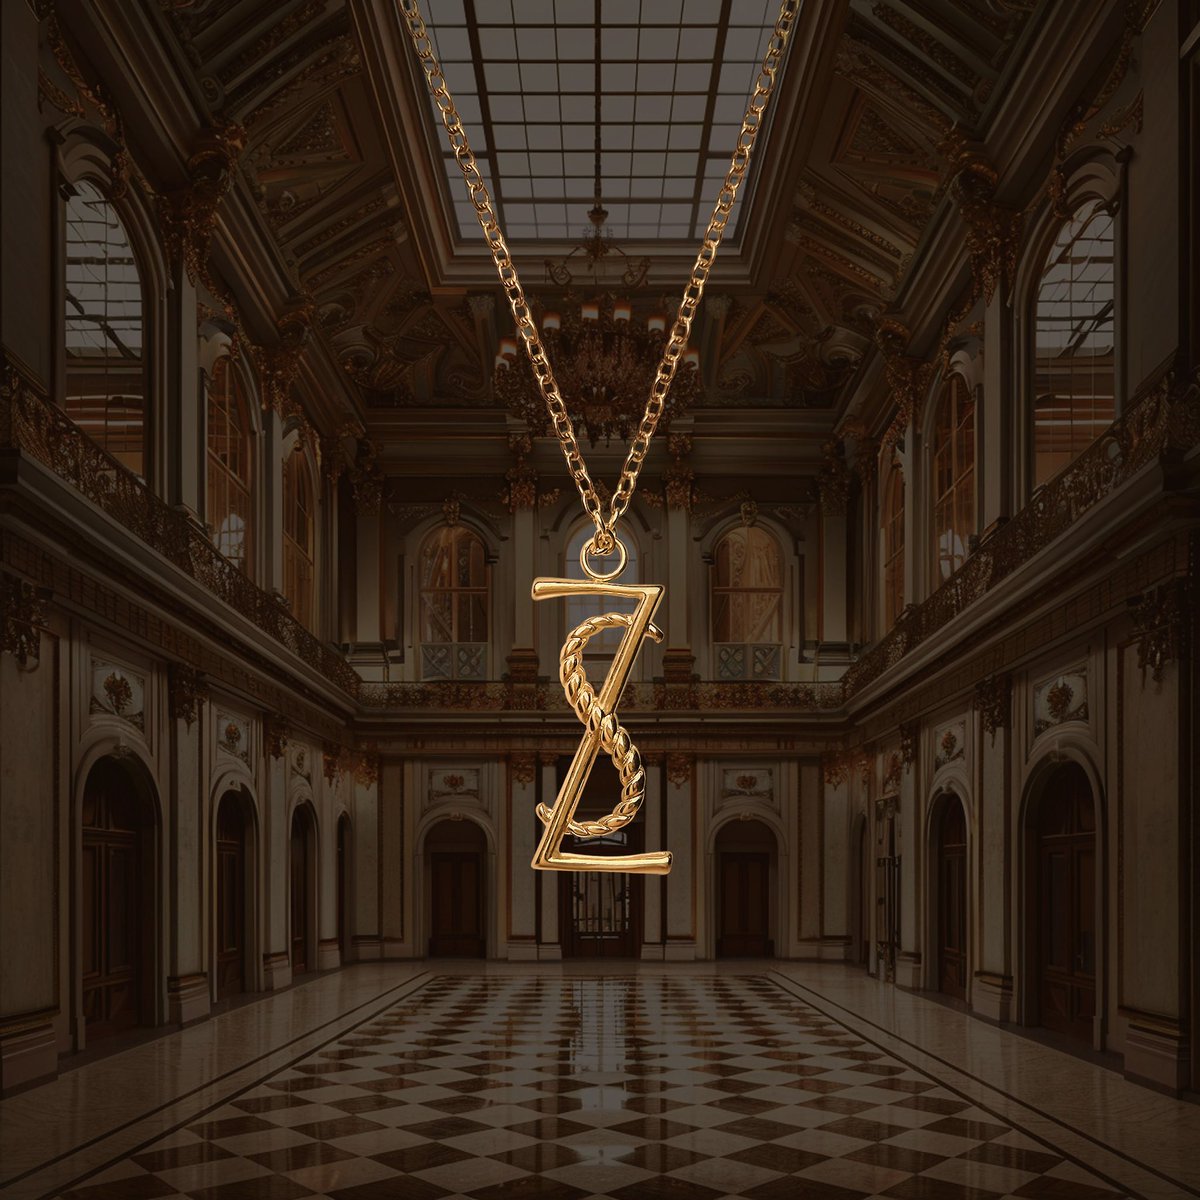 Step into the palace and discover the Amira Necklace, where vintage charm meets modern aesthetics.

#zavasienna #vintagecharm #modernelegance 
#jewelrydesign